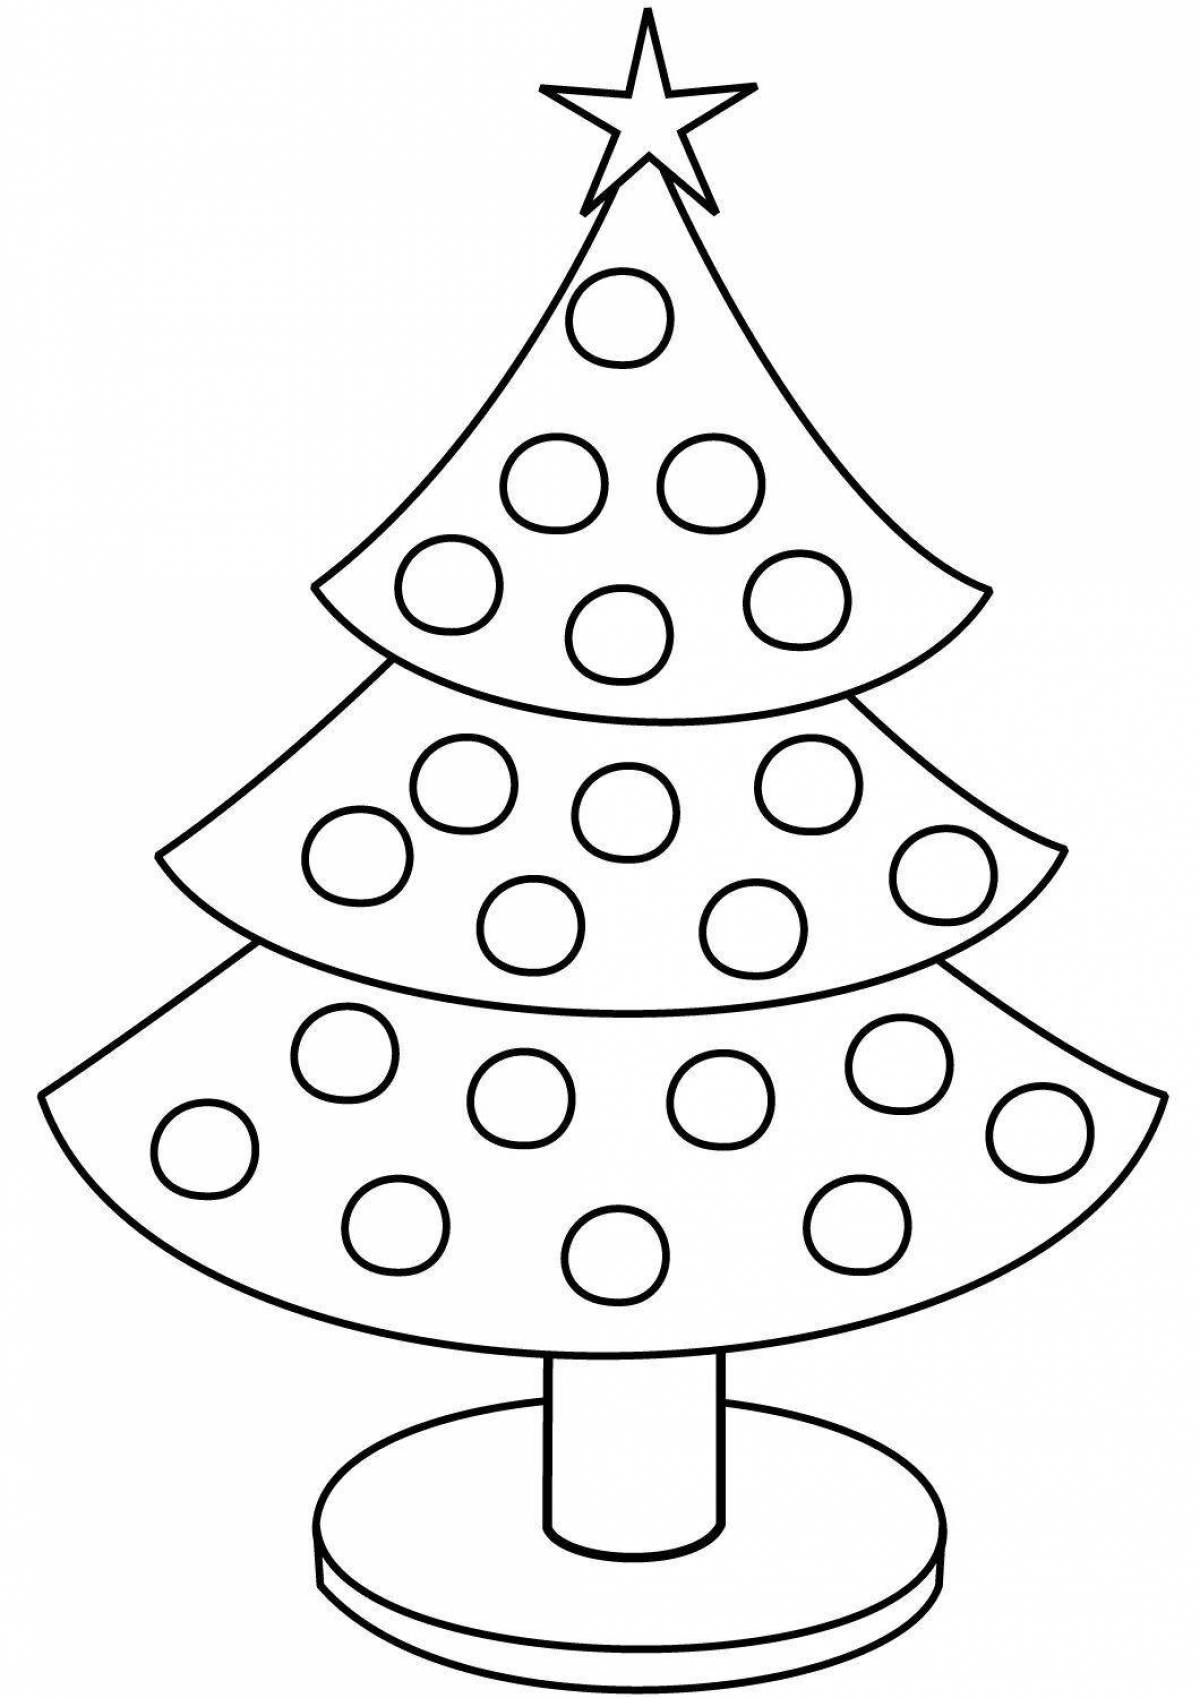 Glitter Christmas tree coloring book for kids